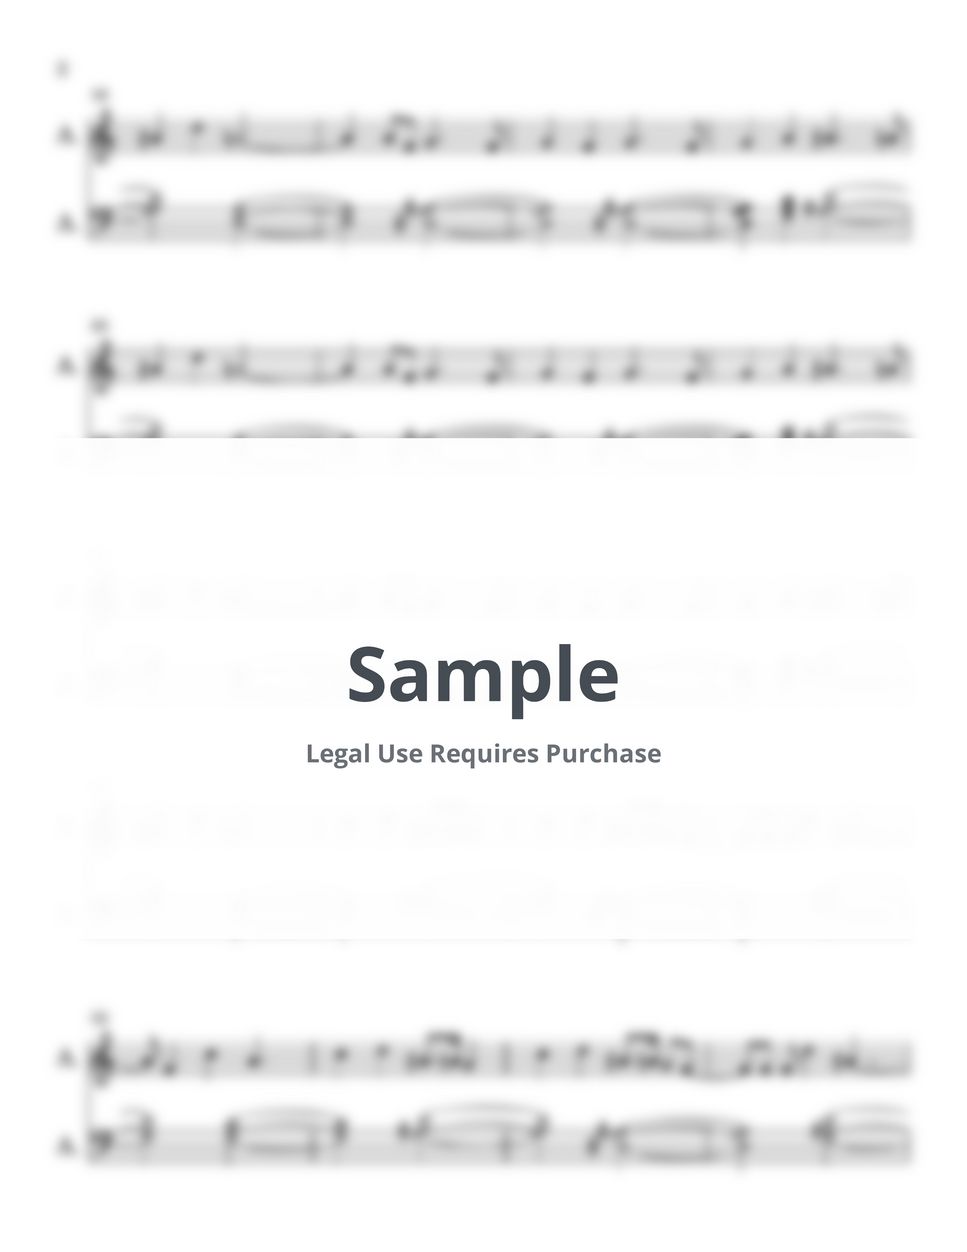 Jesus Image - Yeshua (EASY PIANO SHEET) by Synthly